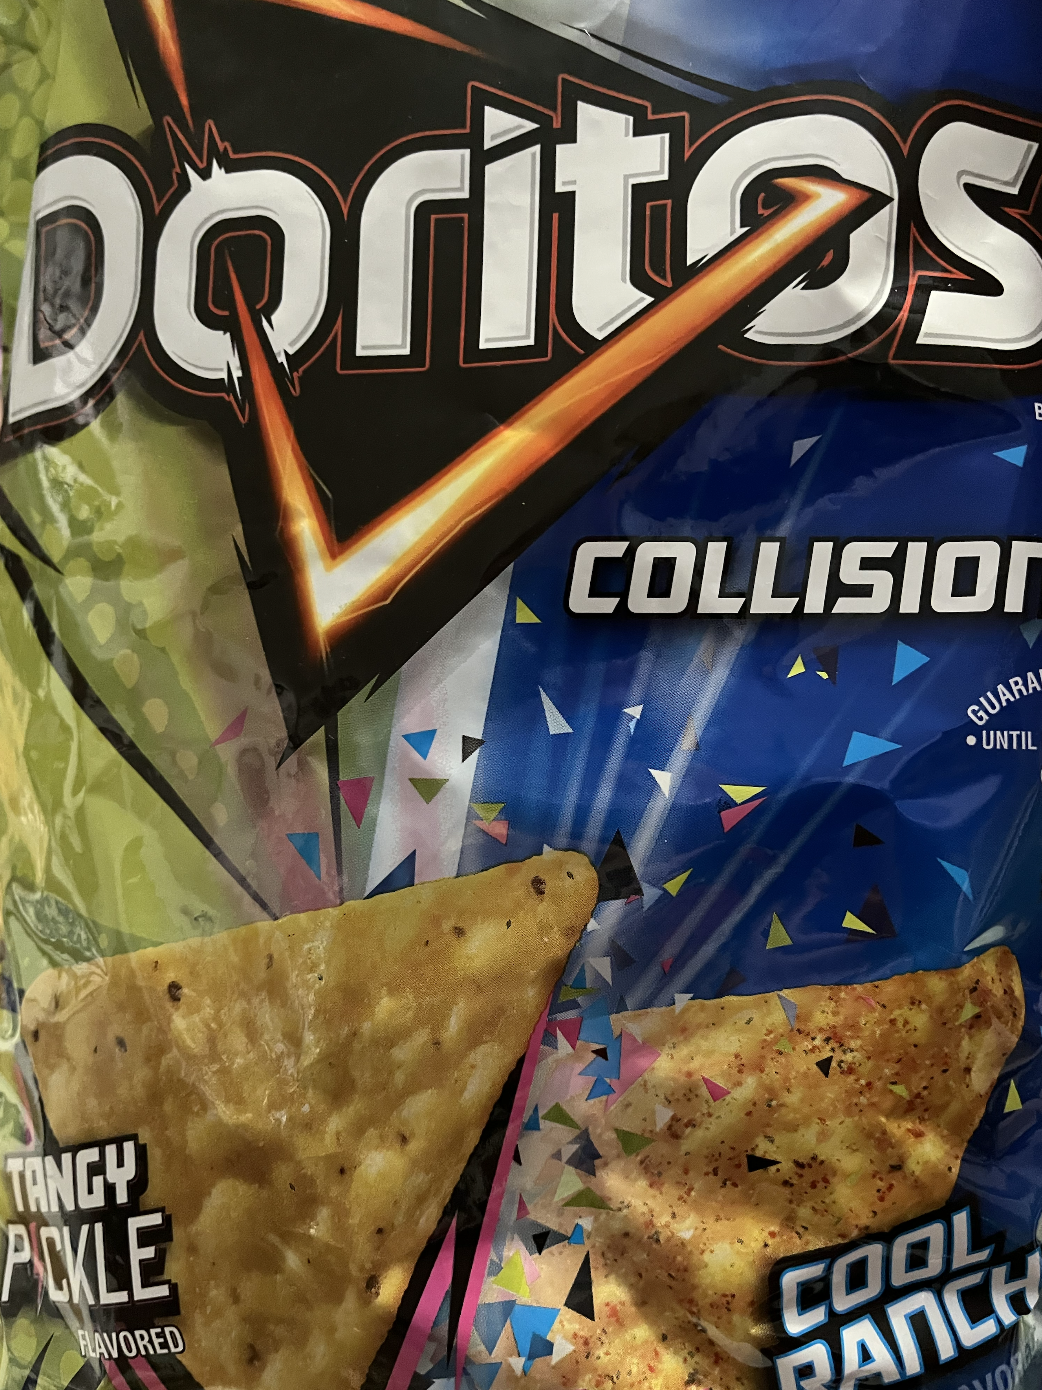 Doritos Collisions Tangy Pickle Cool Ranch bag